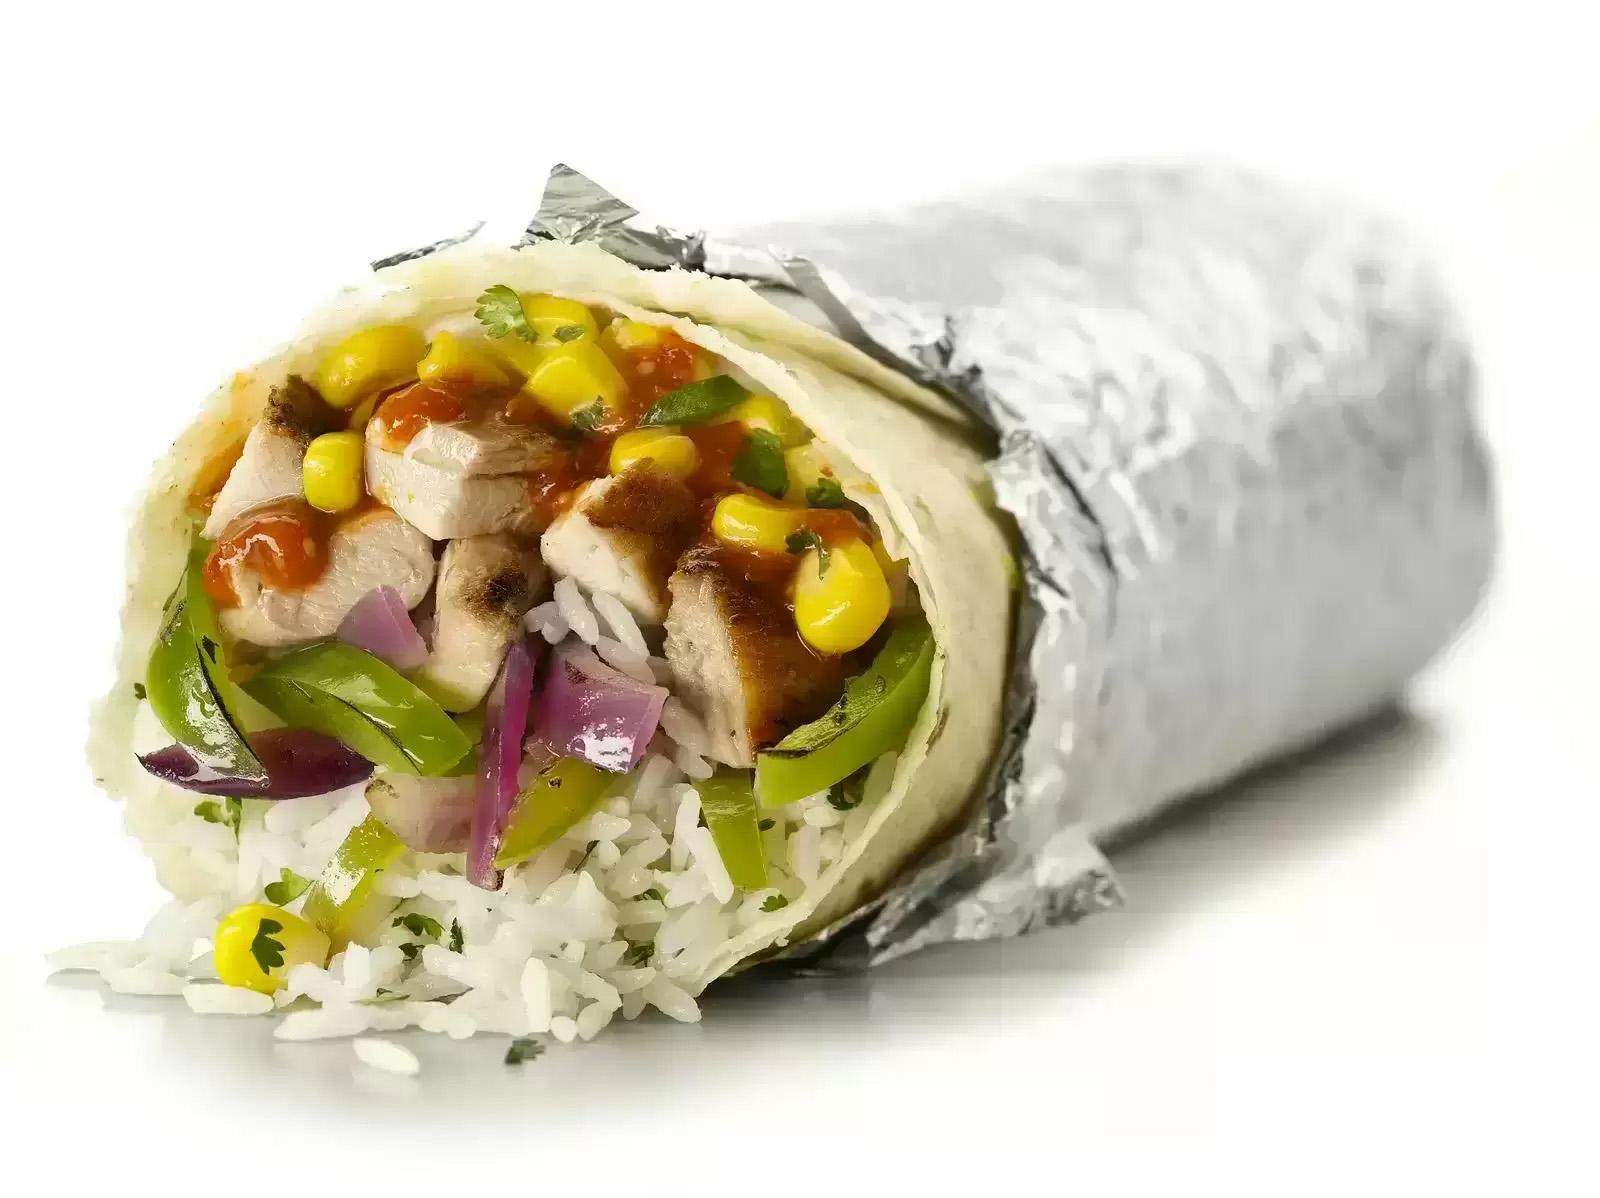 Free Chipotle Burrito Given Out Today at 4pm PT